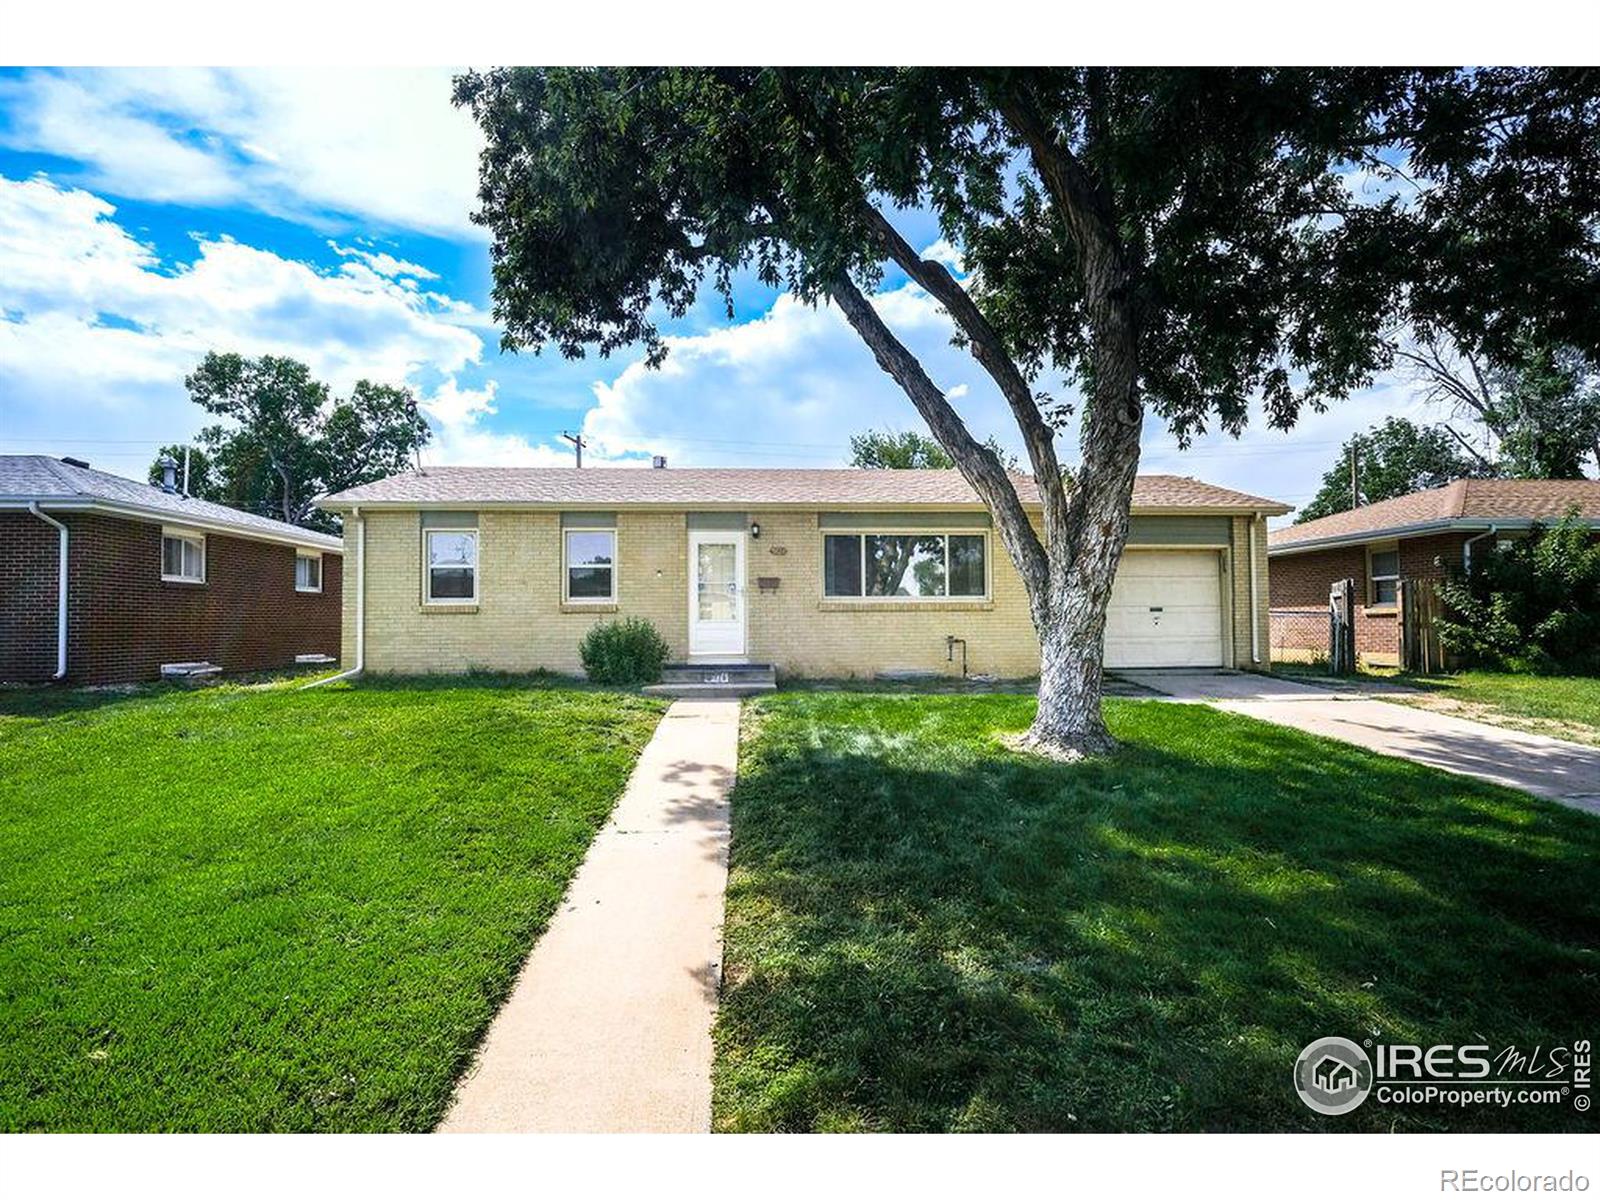 501  26th Ave Ct, greeley MLS: 123456789995539 Beds: 4 Baths: 2 Price: $355,000